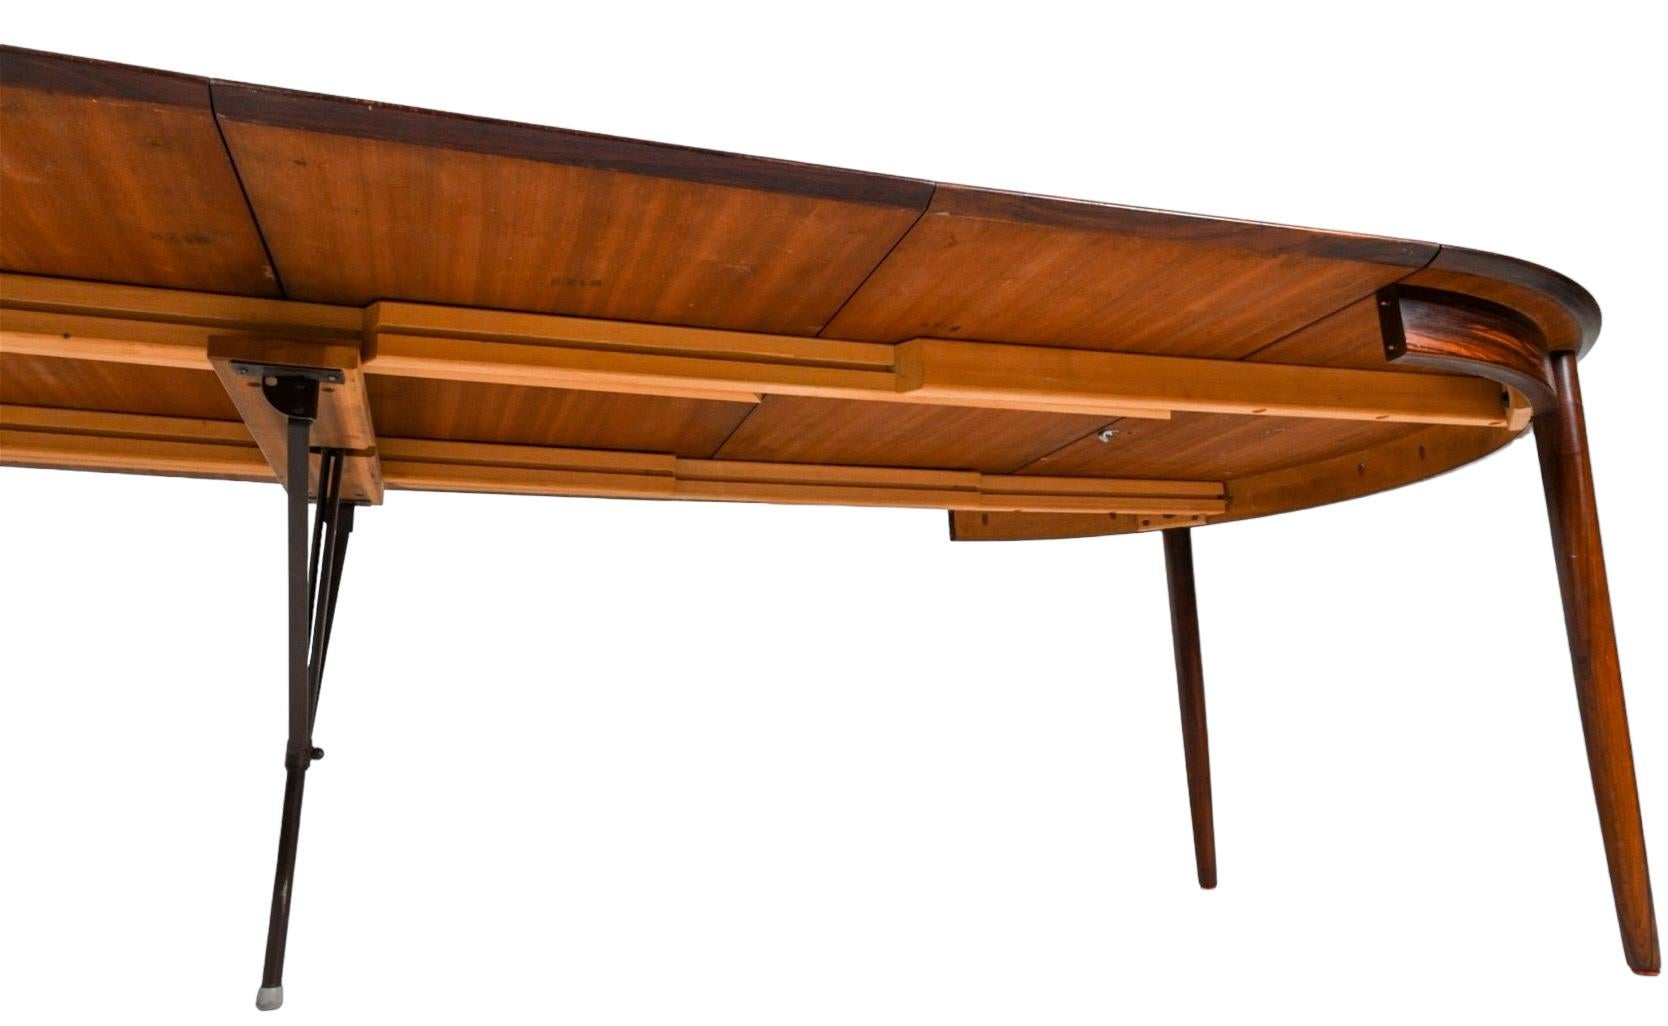 20th Century Danish Modern Arne Vodder Style Rosewood Dining Table W/ 4 Leaves  For Sale